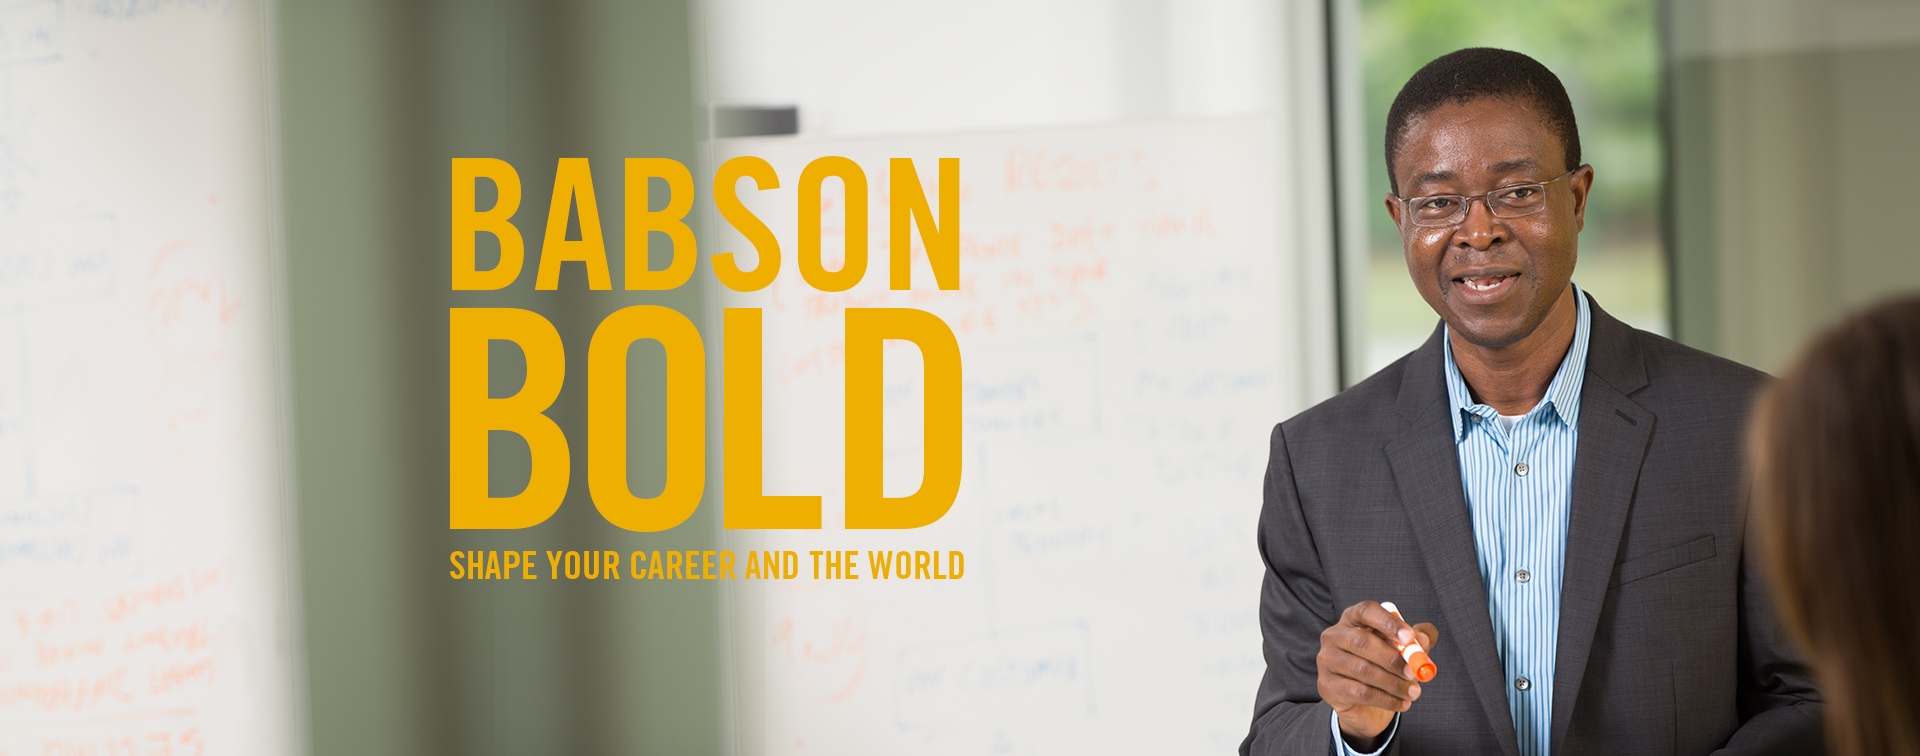 Babson Bold: Shape your career and the world